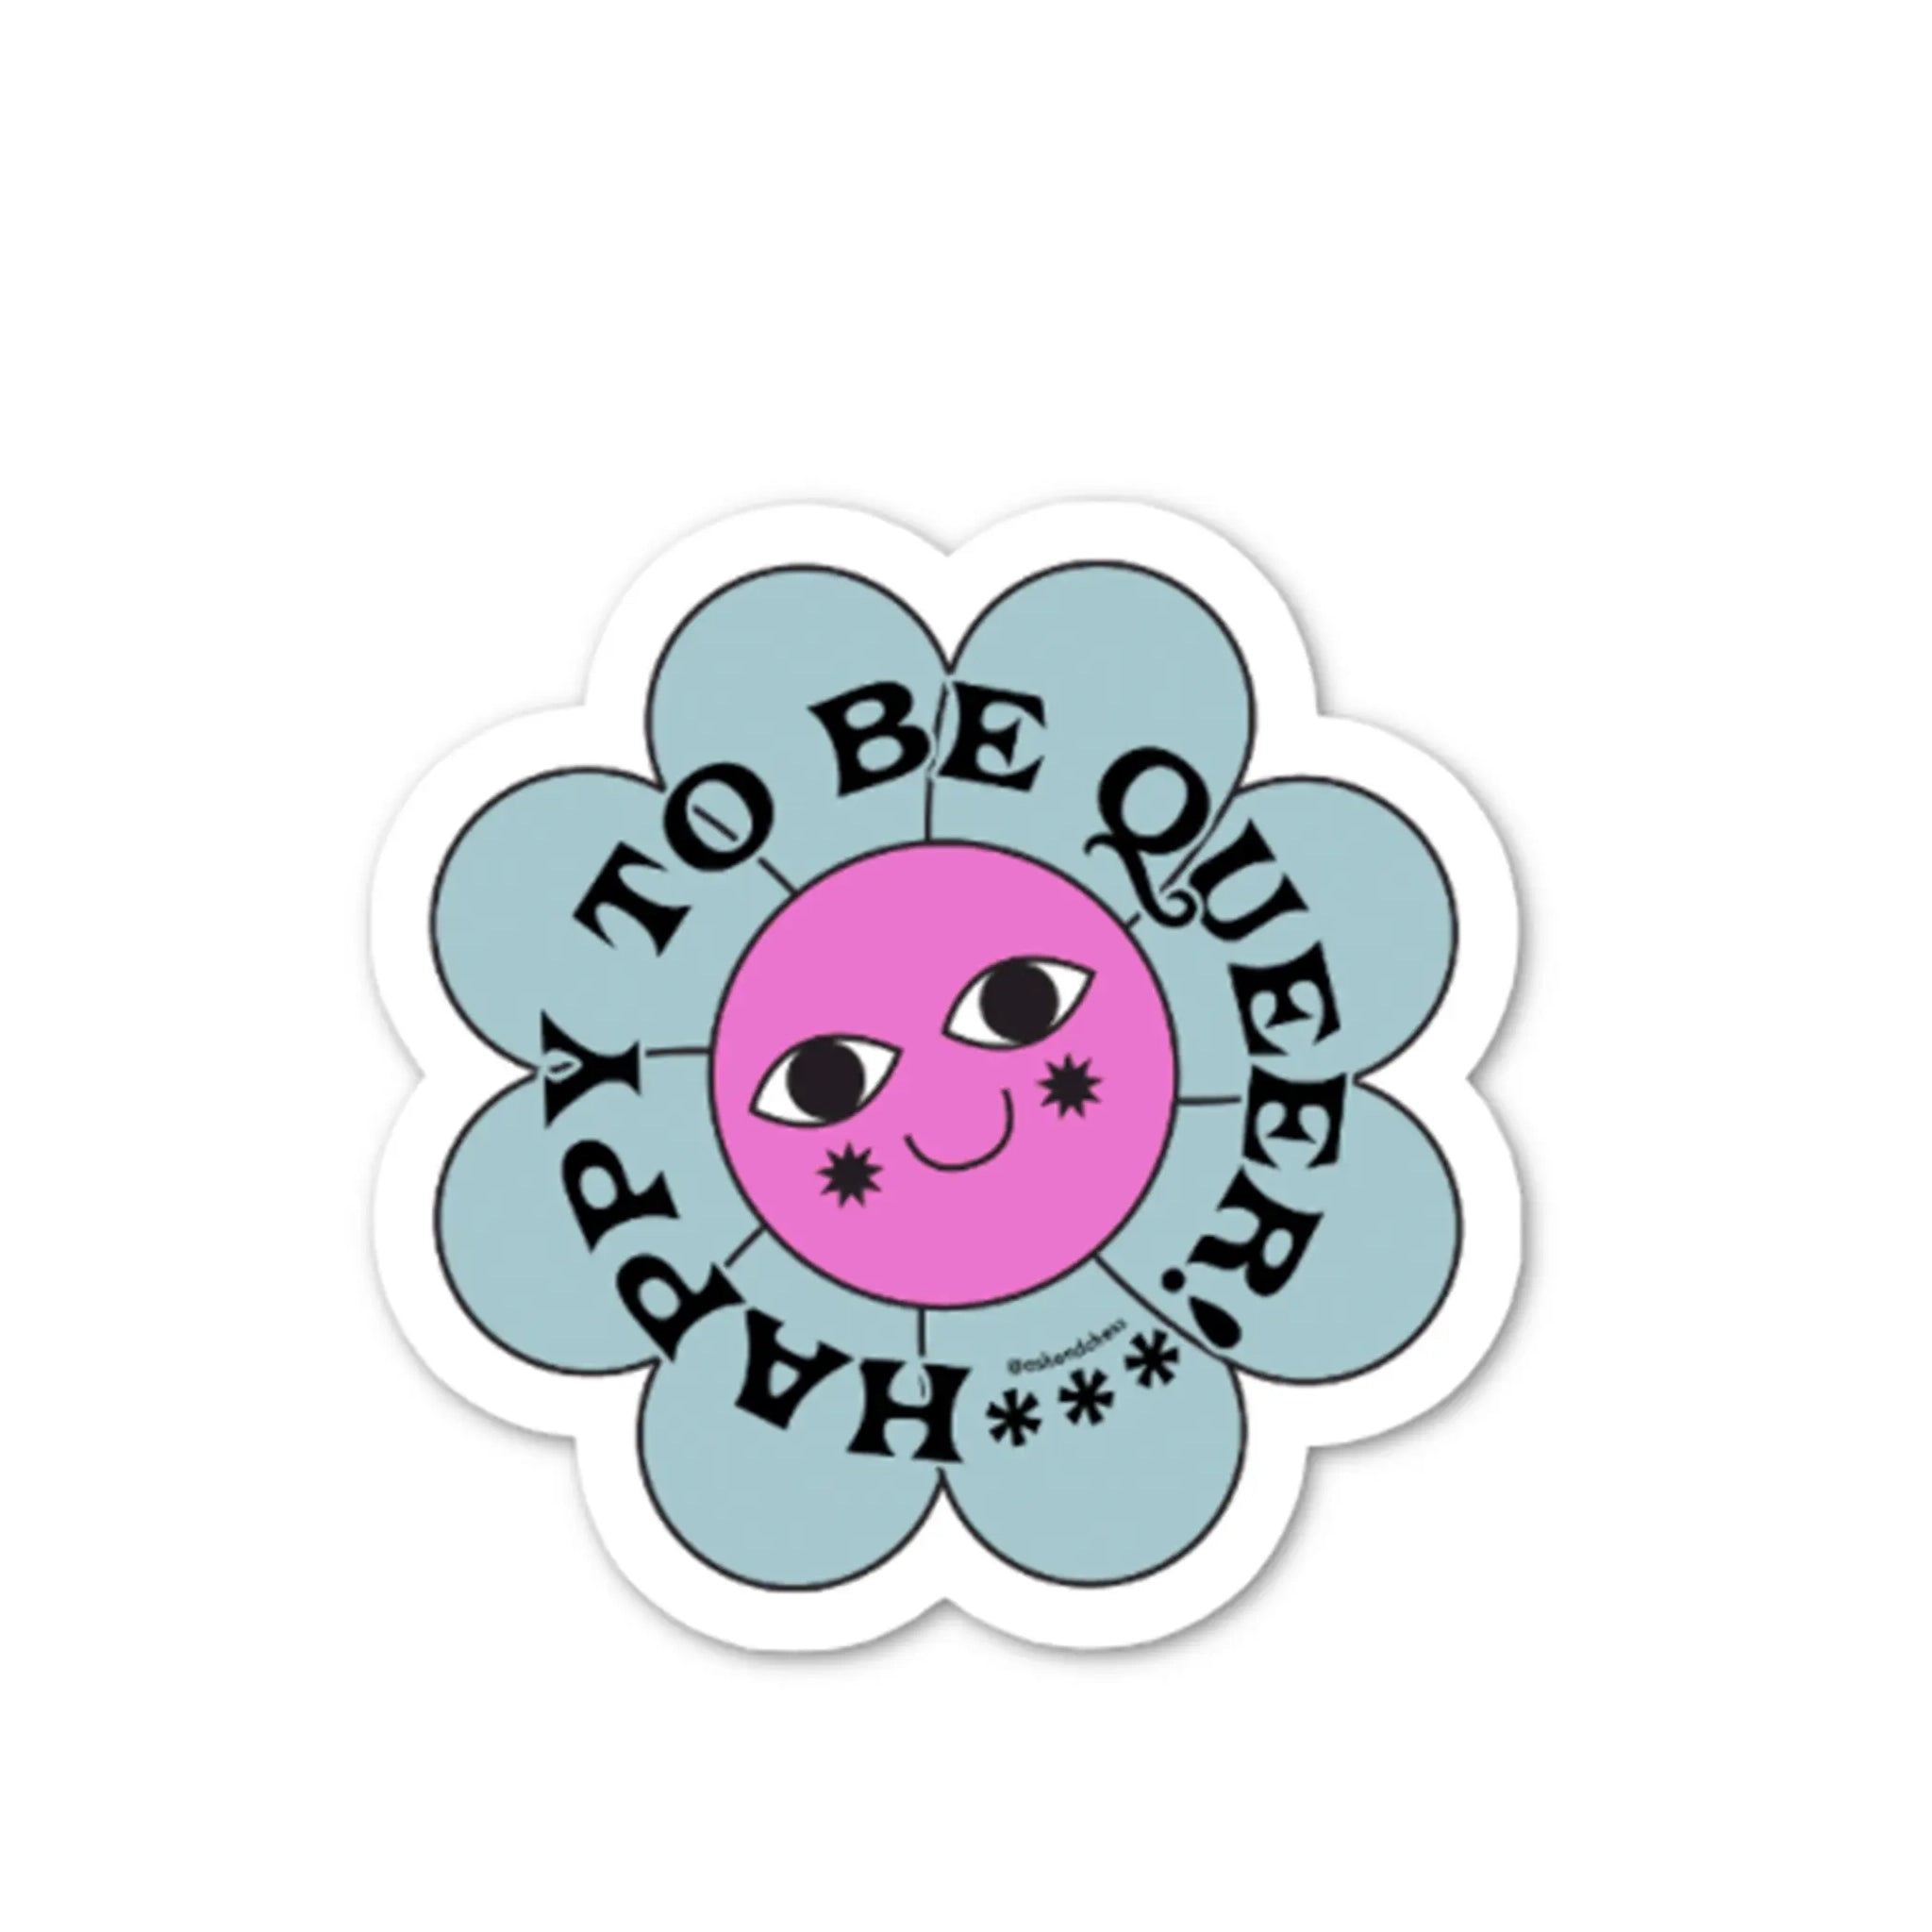 On a white background is a flower shaped sticker with blue petals, a fuchsia center and a smiling face. Around the edge of the sticker is black text that reads, "Happy To Be Queer!".